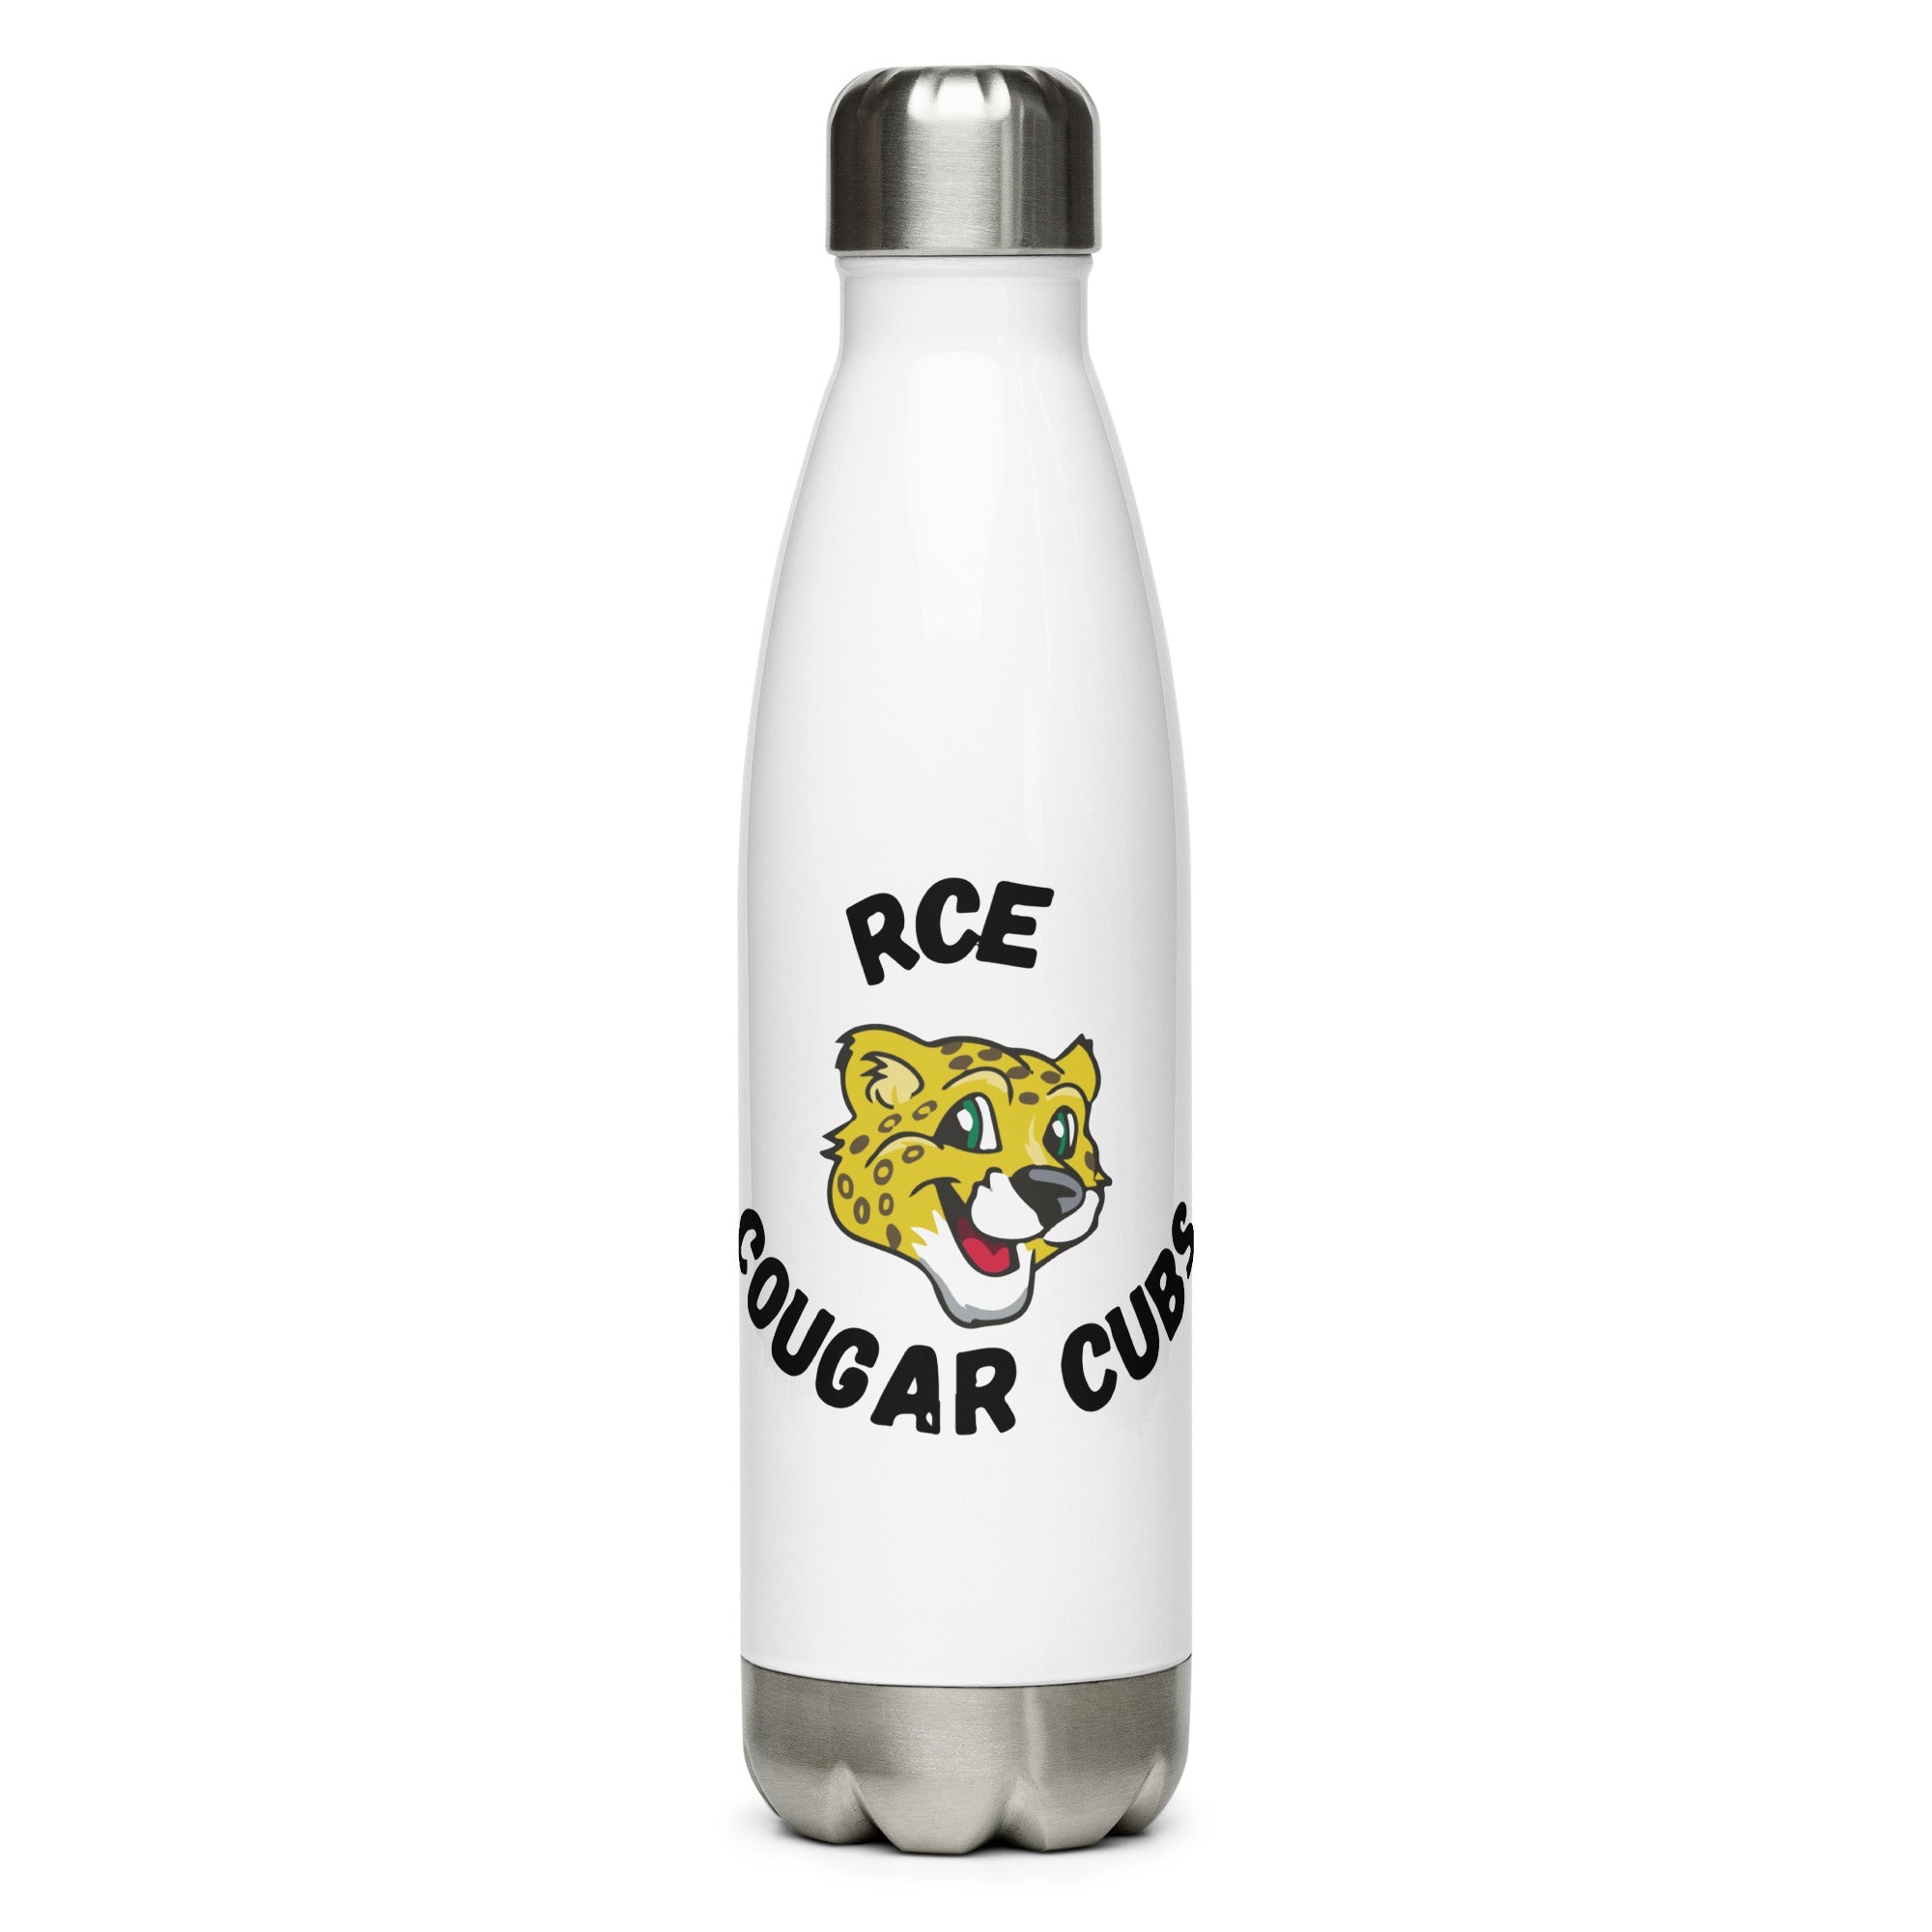 RCES Stainless Steel Water Bottle